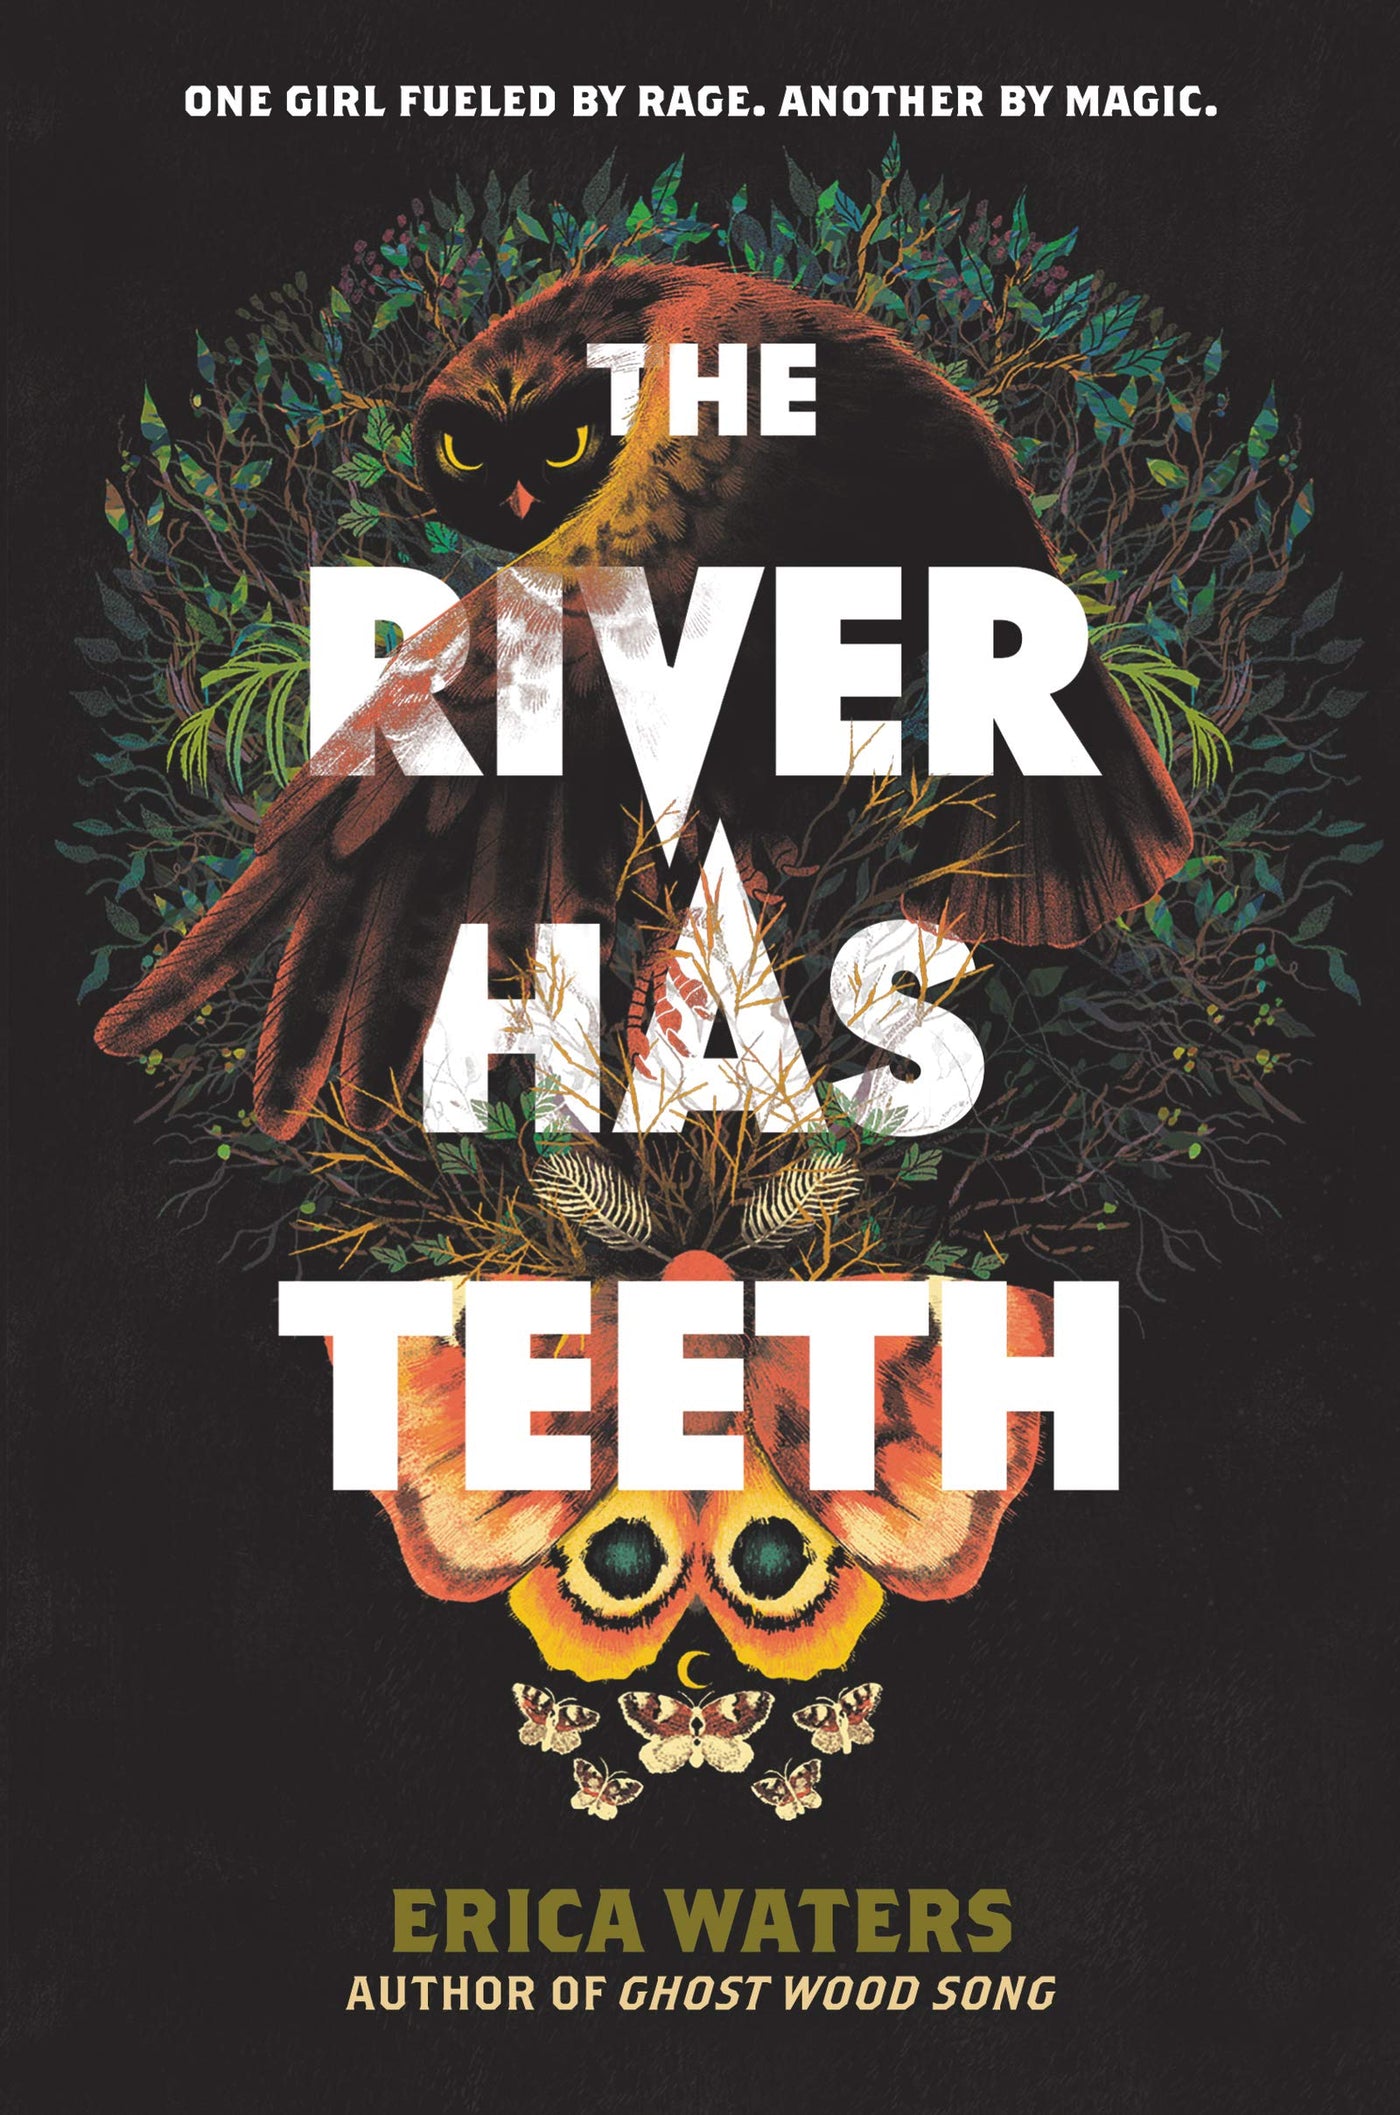 “The River Has Teeth” by Erica Waters